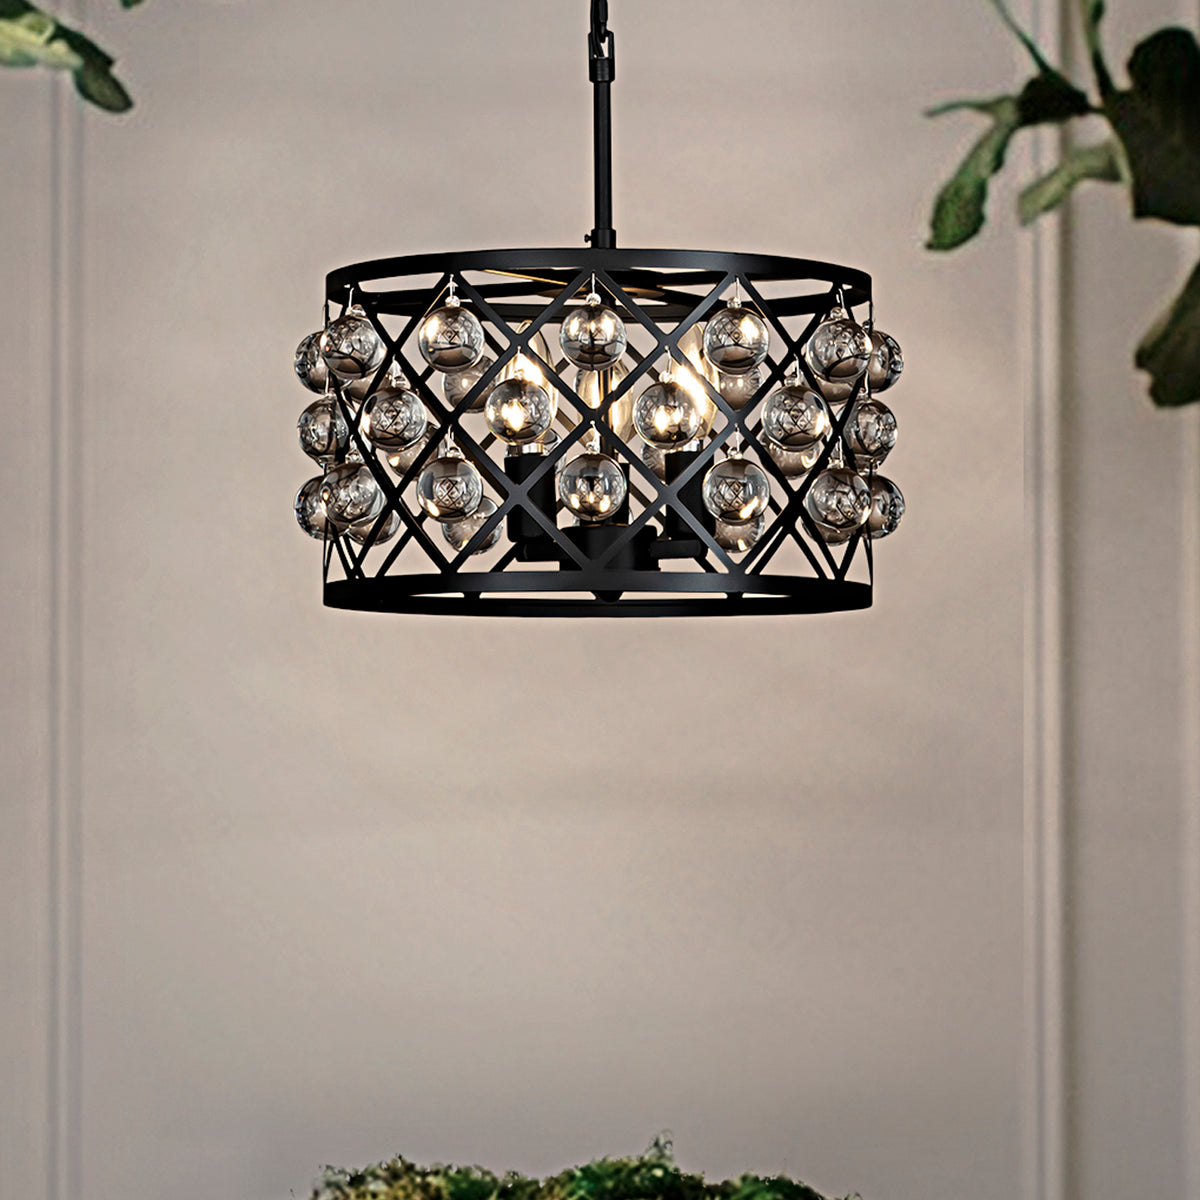 OPEN BOX- Farmhouse Black Drum Chandelier with Crystal Spheres